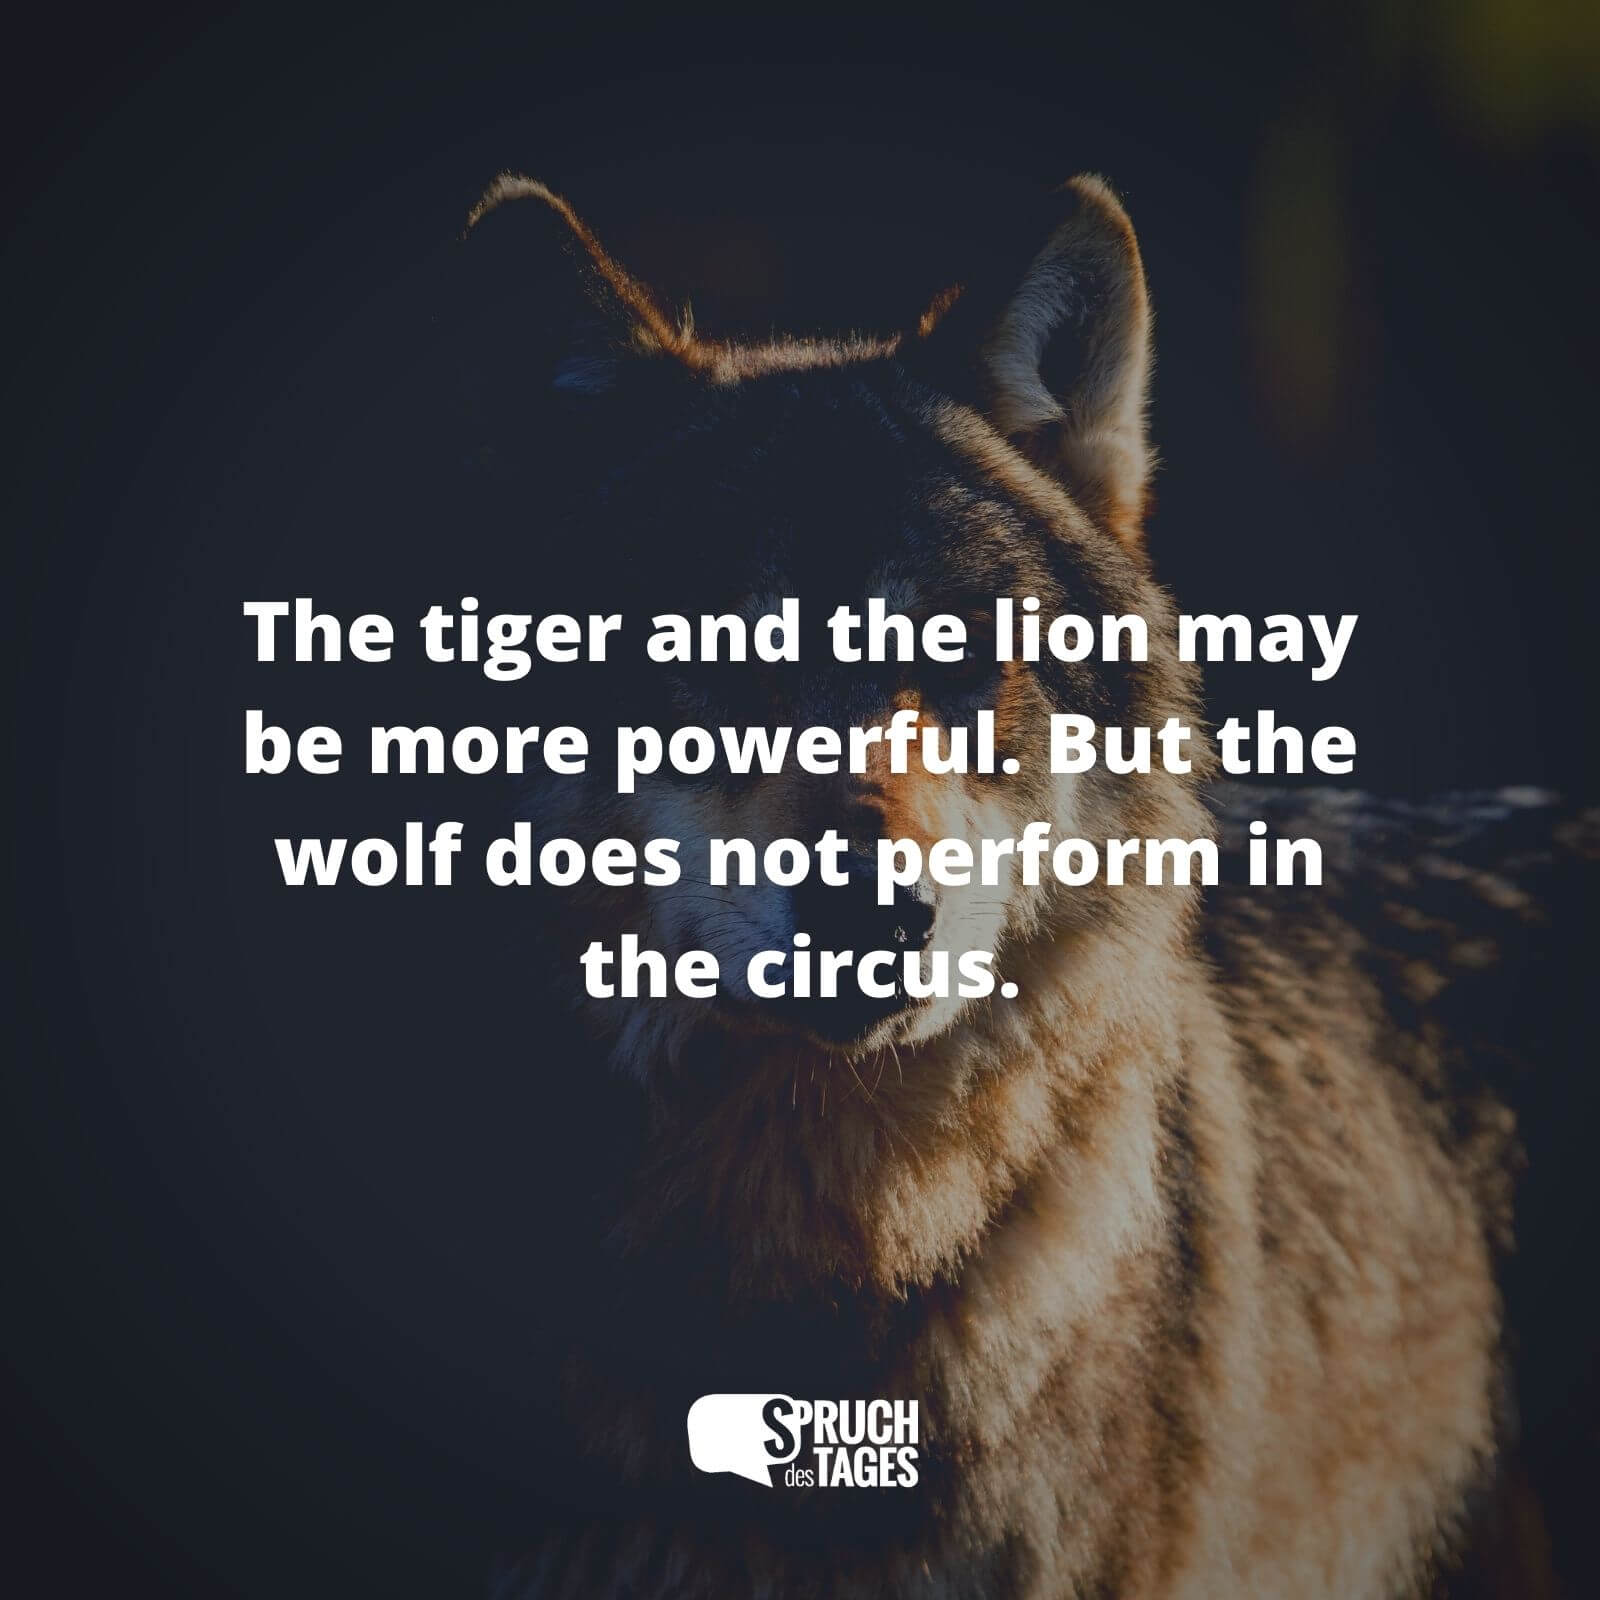 The tiger and the lion may be more powerful. But the wolf does not perform in the circus.